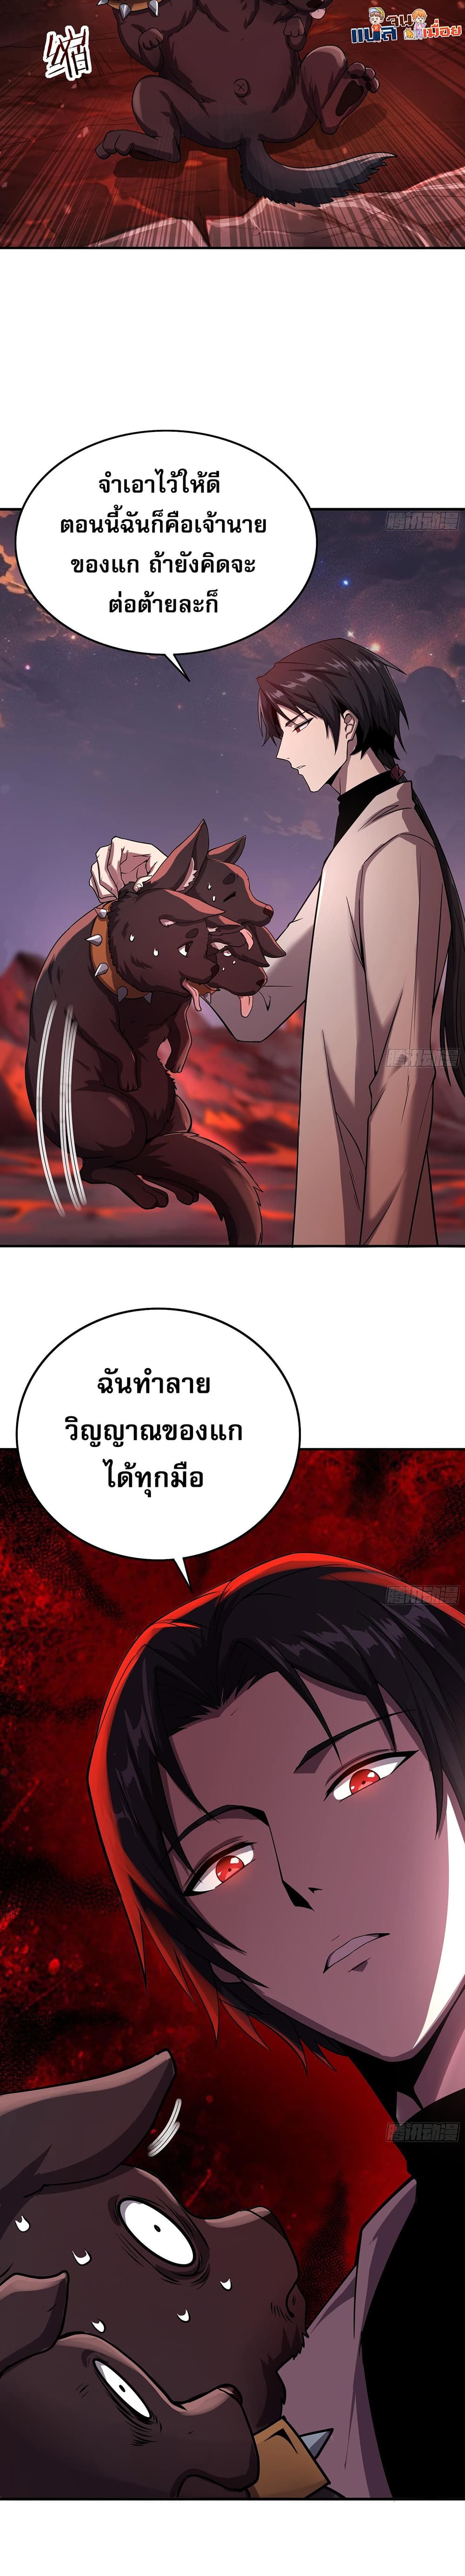 The All-Knowing Cultivator ผู้ฝึกตนผู้รอบรู้ 10/10